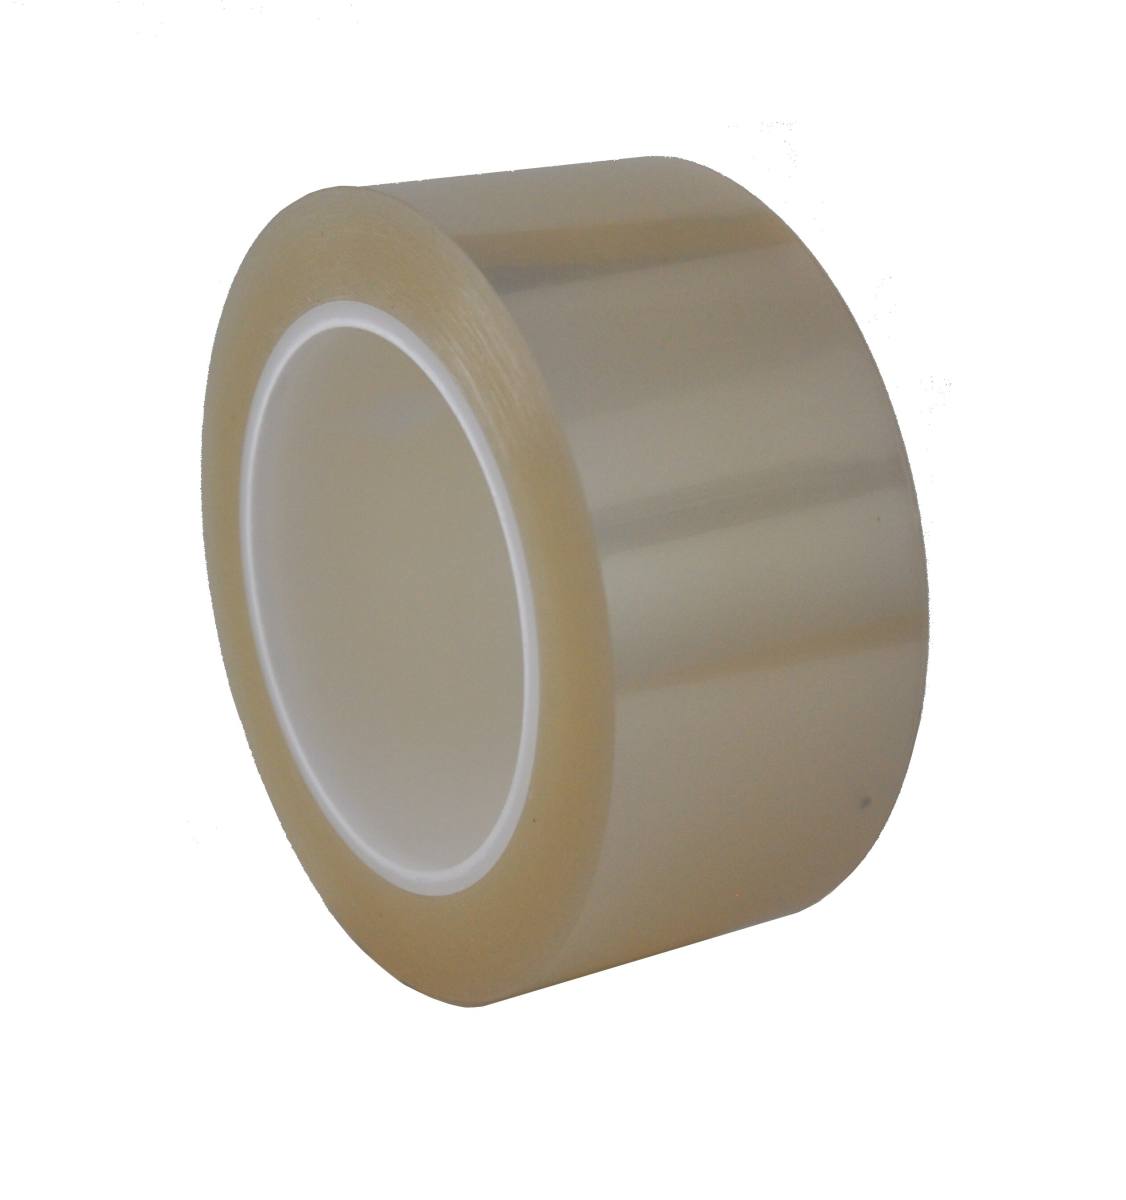 S-K-S 208T polyester adhesive tape, 15mmx66m, transparent